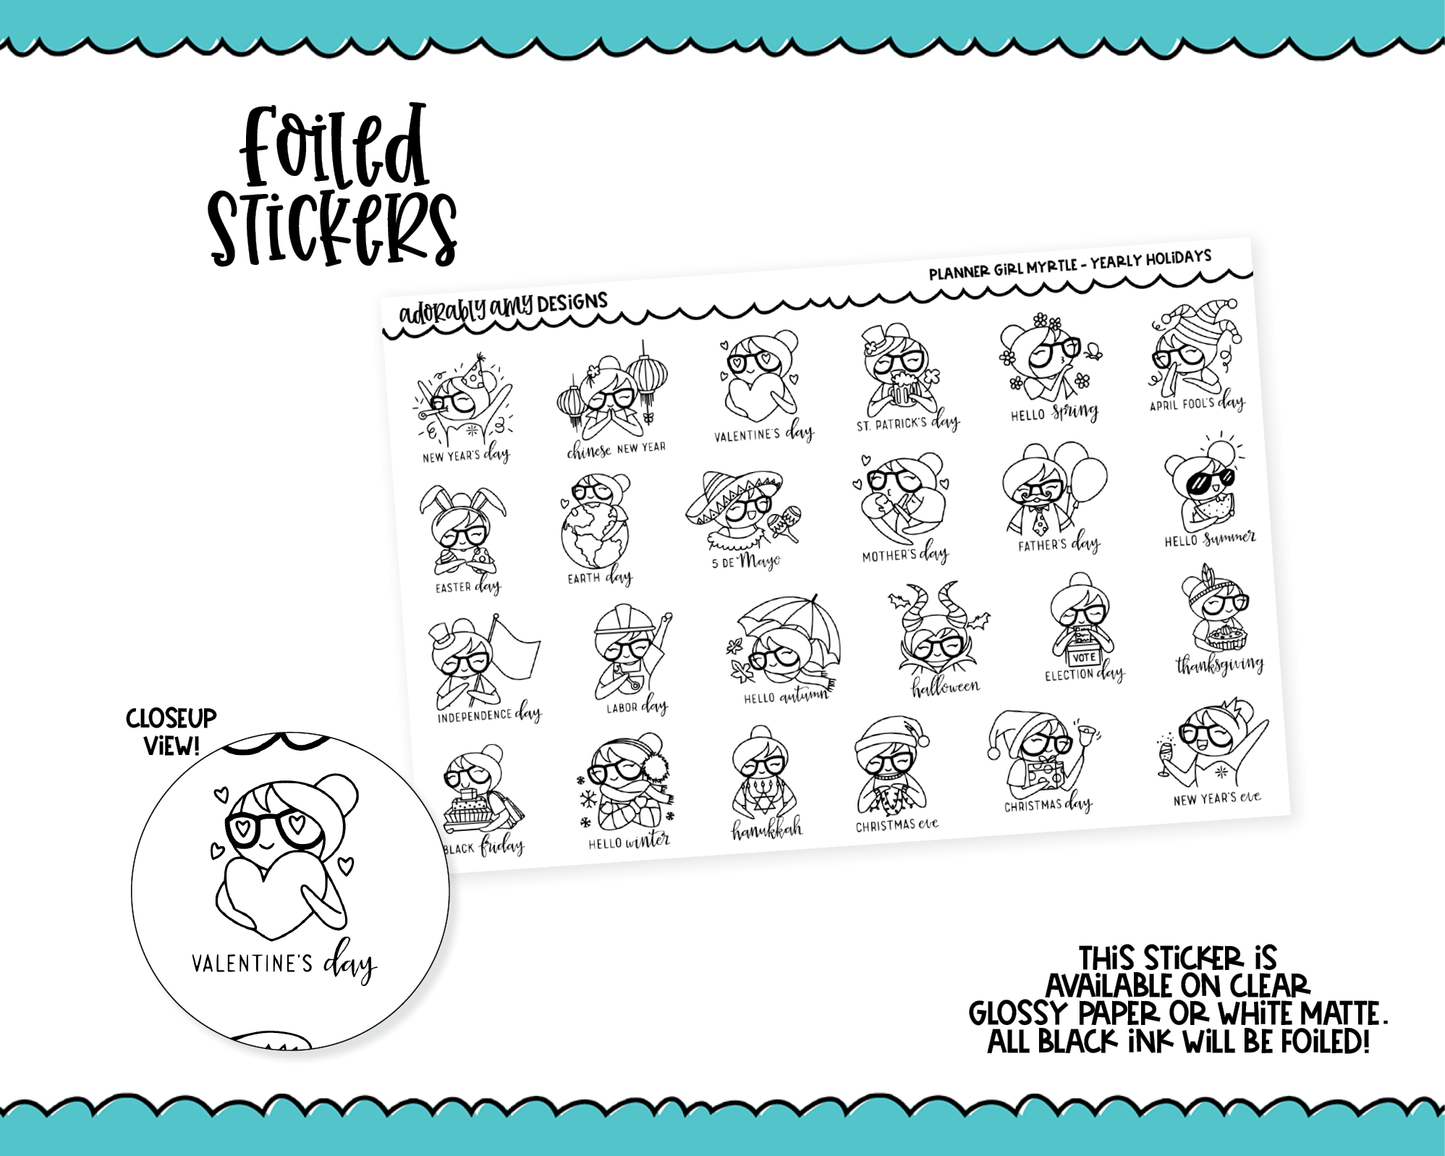 Foiled Doodled Planner Girls Yearly Holidays Decoration Planner Stickers for any Planner or Insert